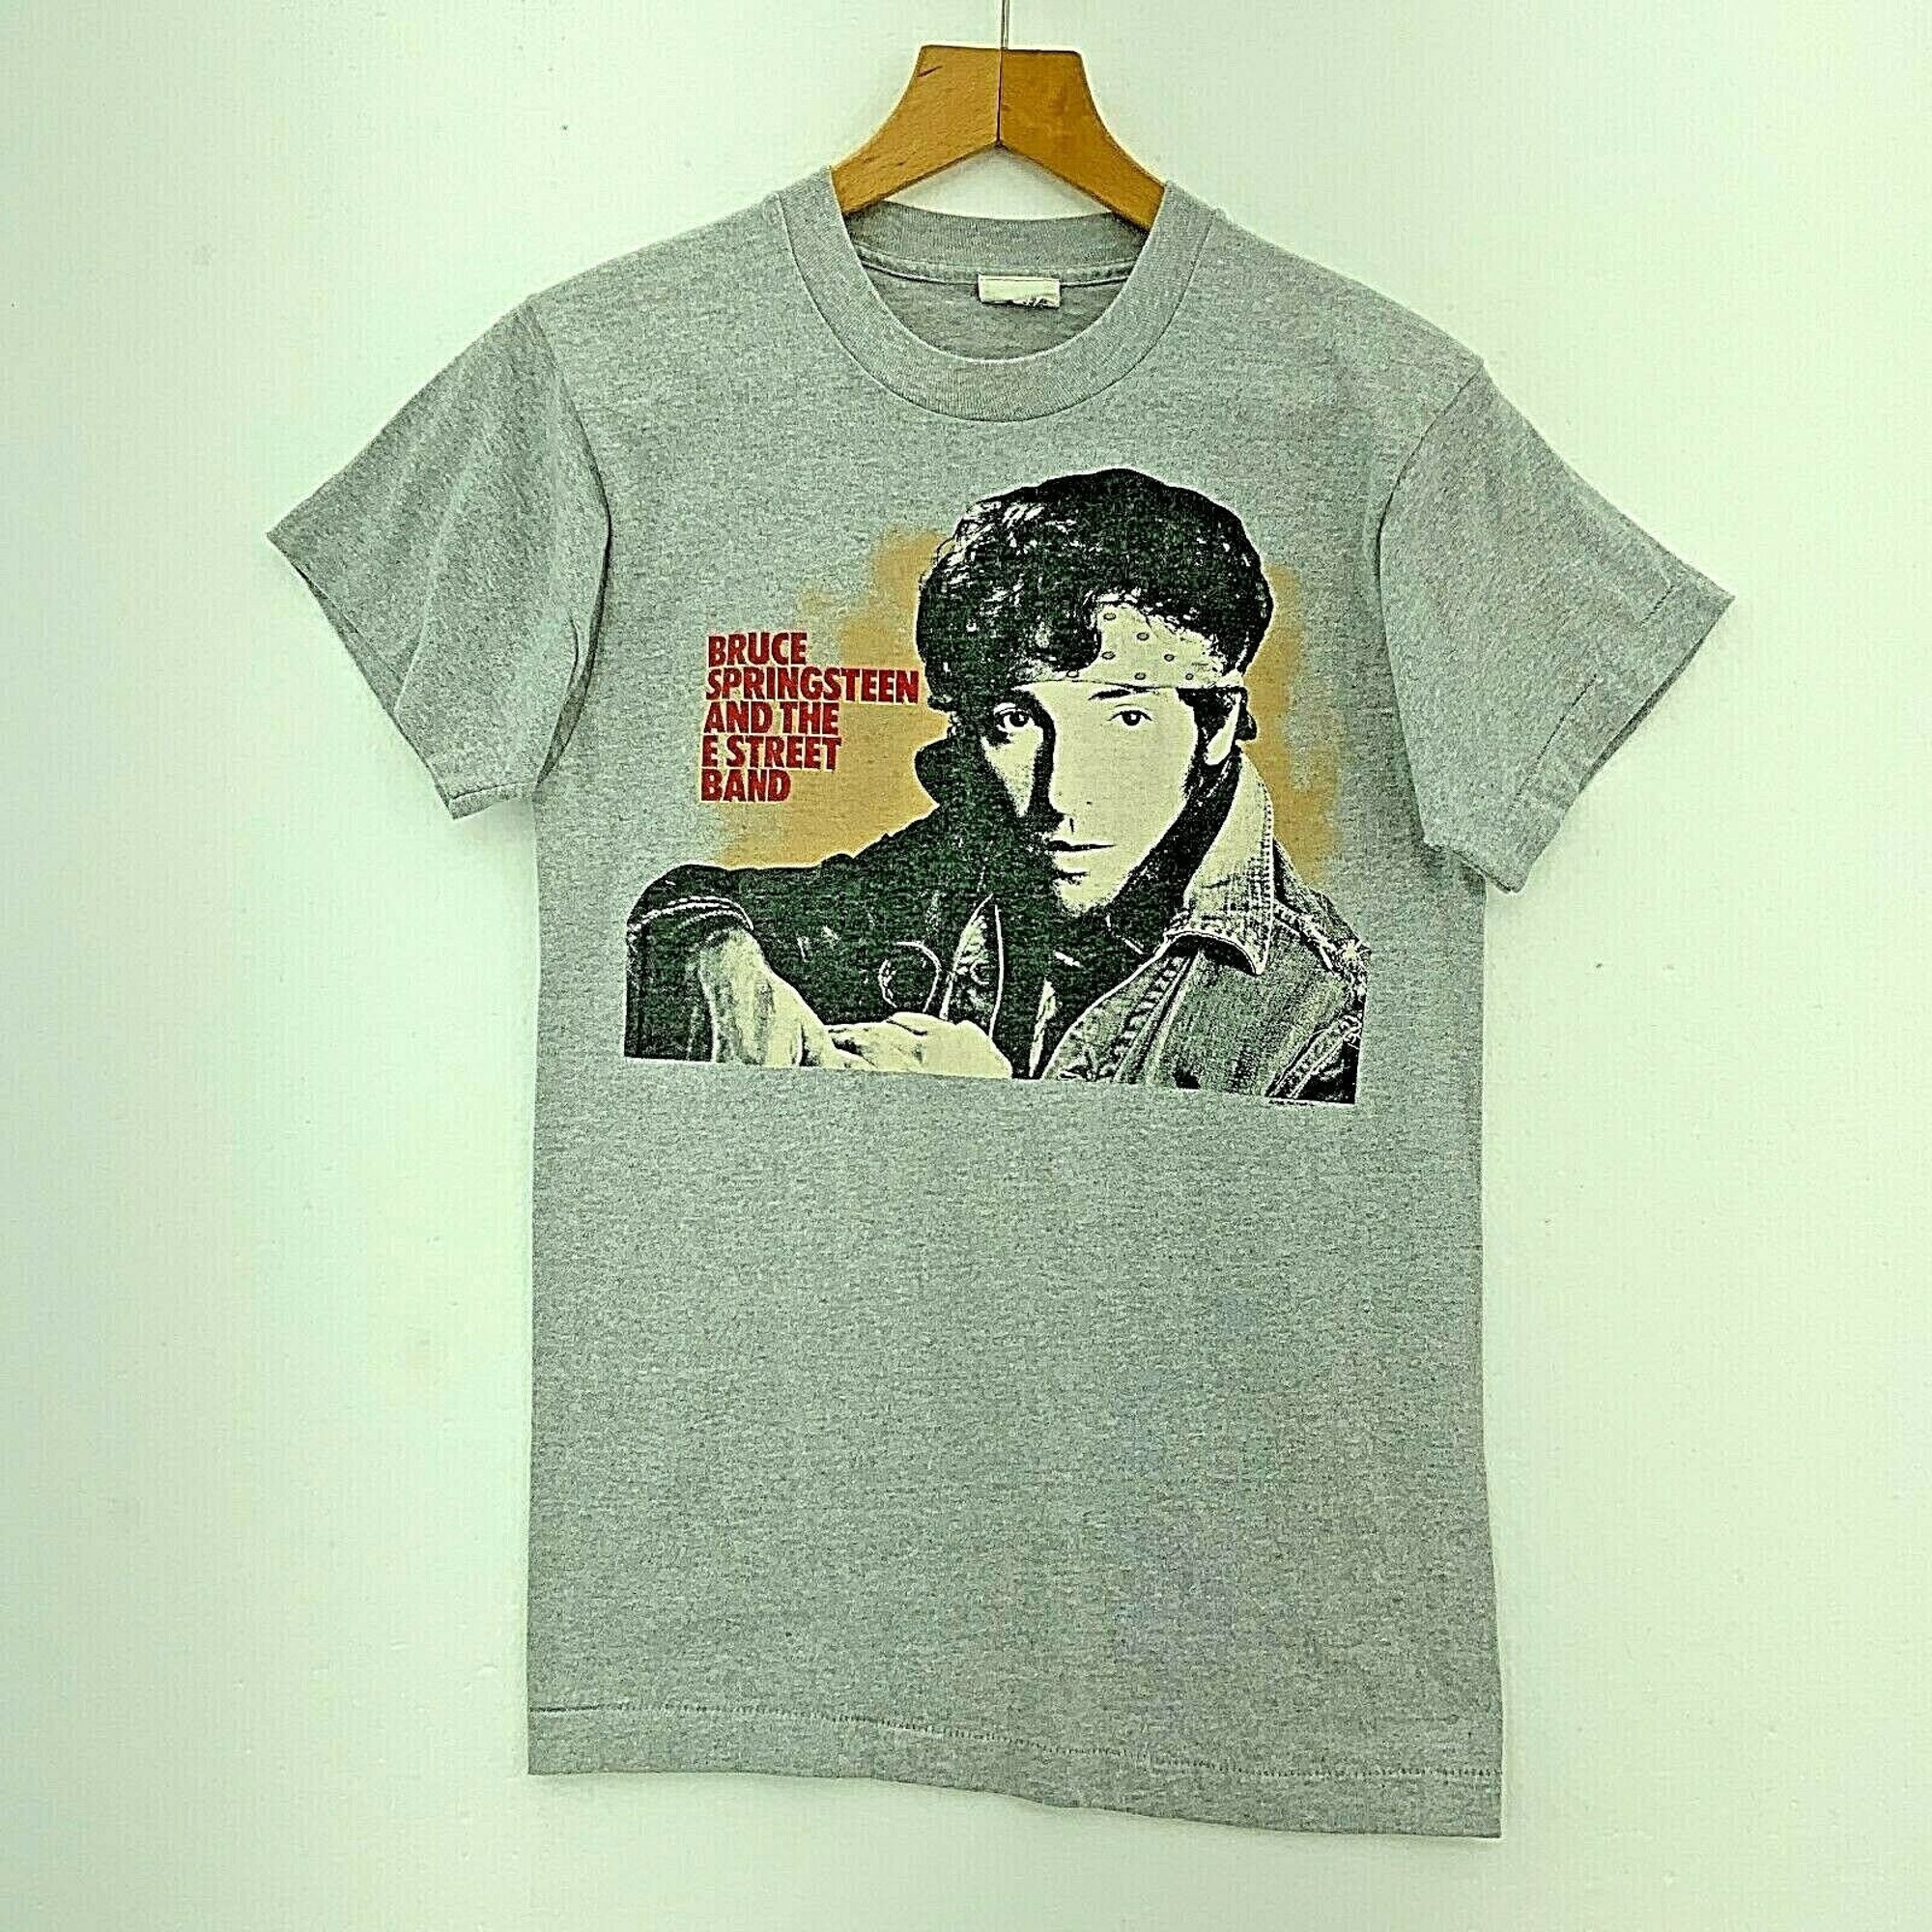 Bruce Springsteen And The E Street Band Gray Vintage T-shirt, Rock Band T-Shirt